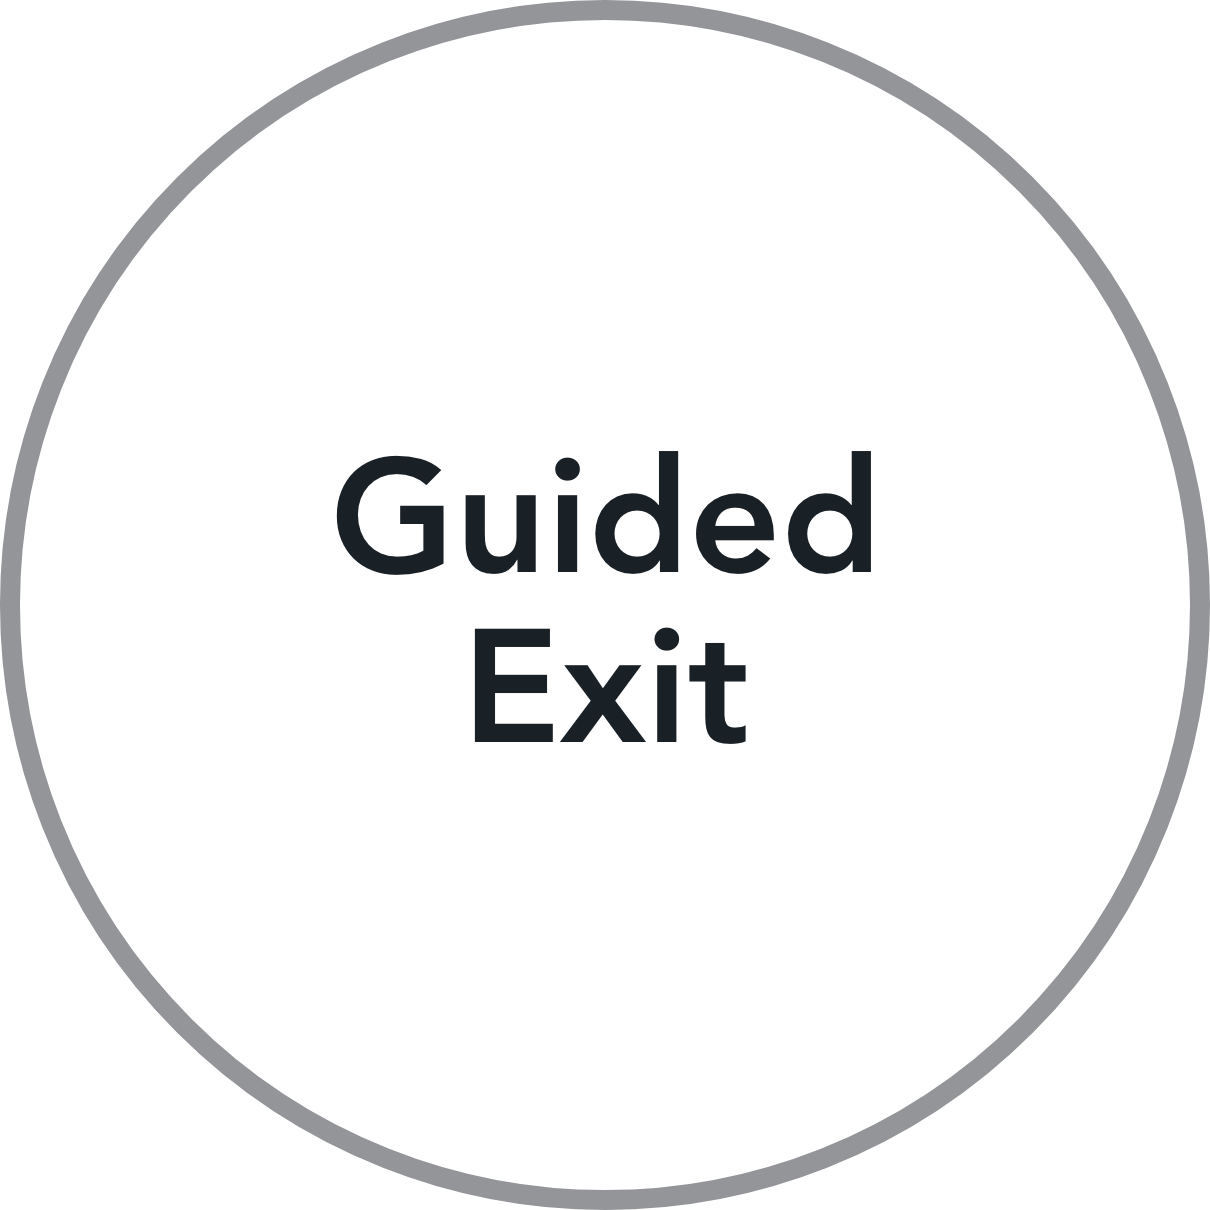 Guided Exit